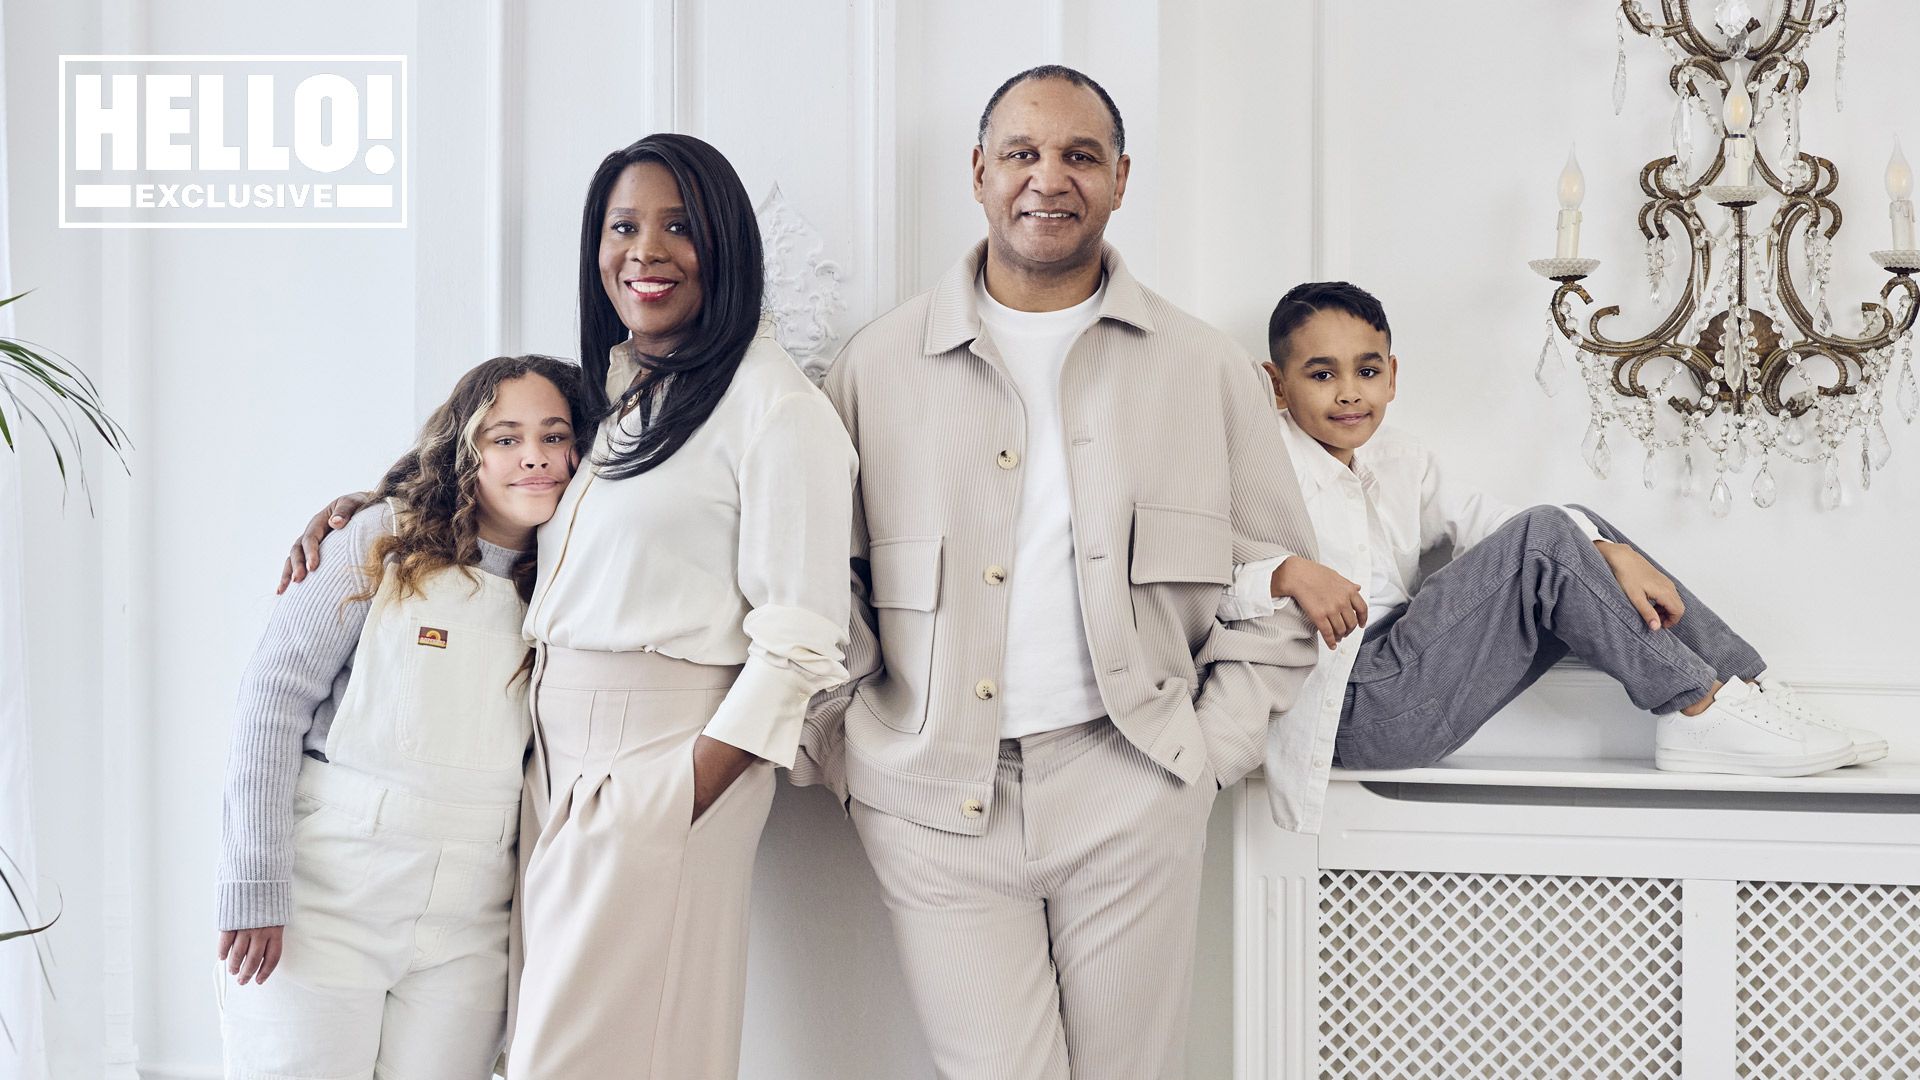 Tessa Sanderson poses with her family for exclusive HELLO! shoot